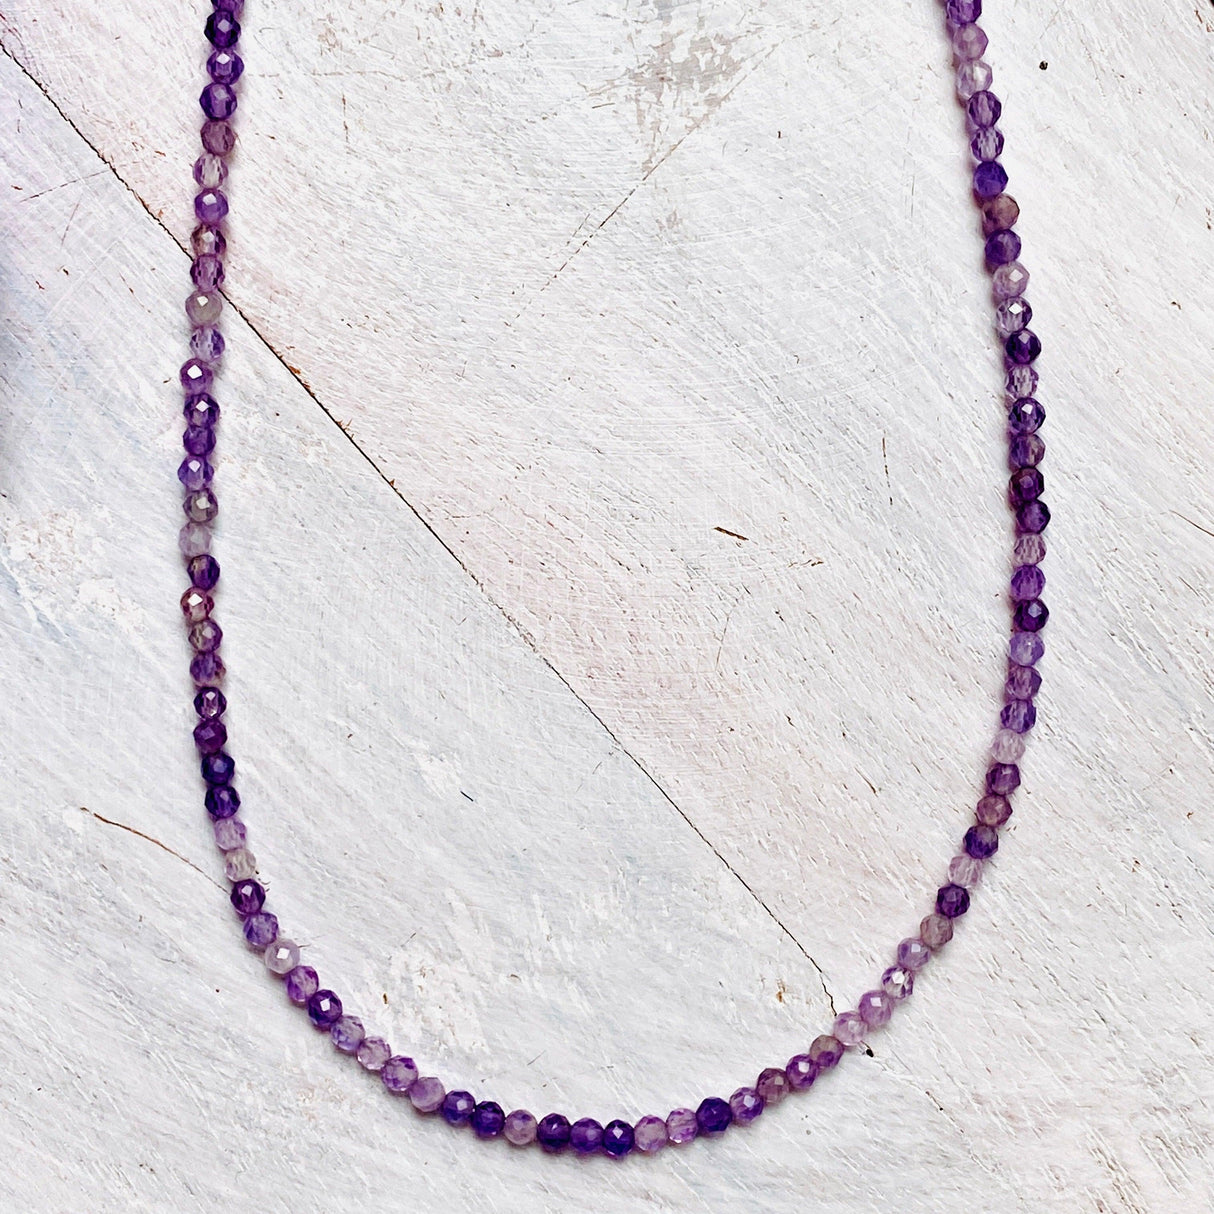 Micro Bead Necklace - Amethyst - Nature's Magick